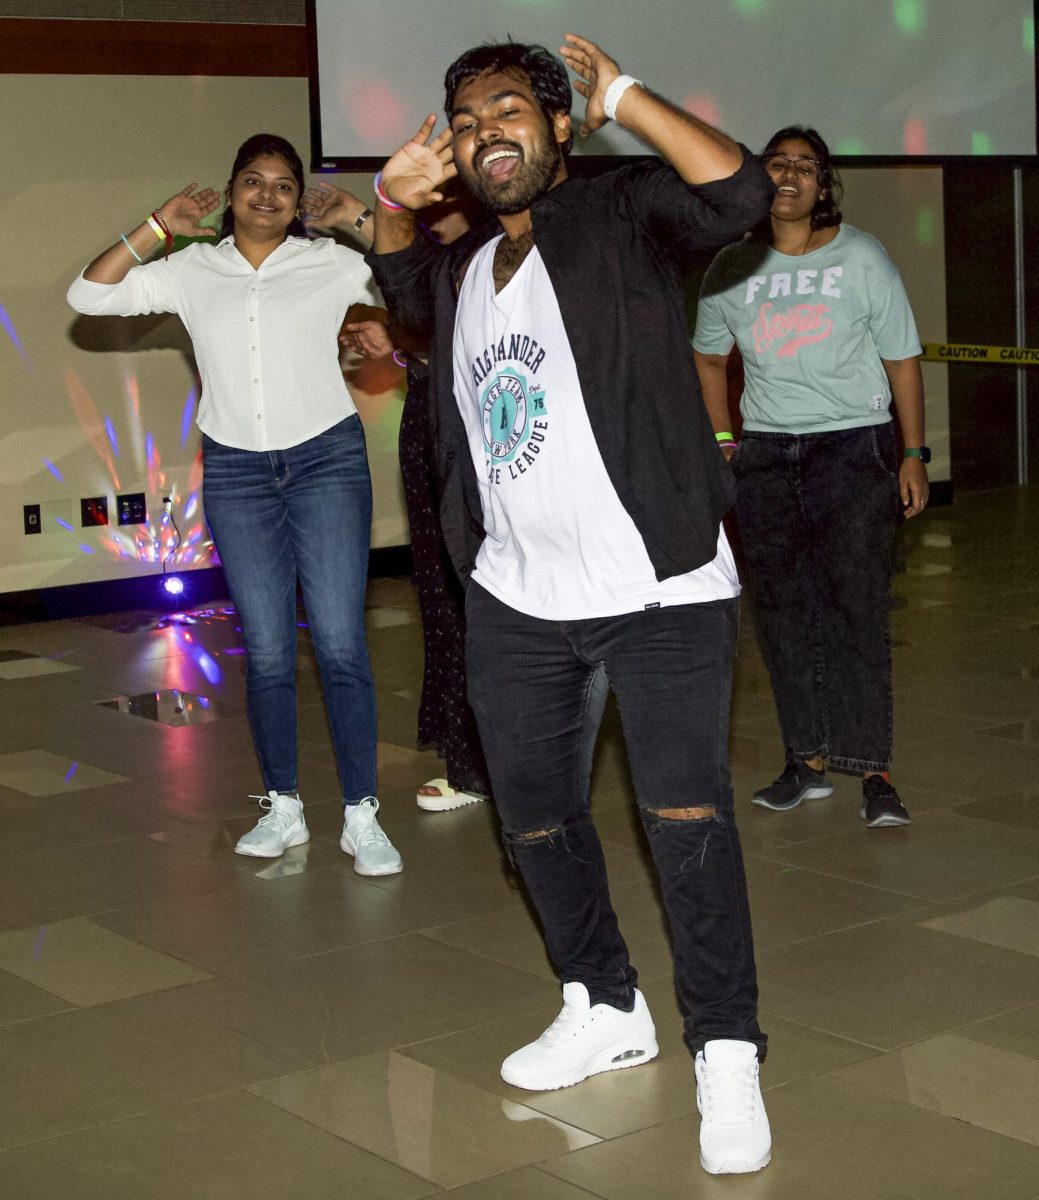 Wichita State students get funky in the middle of the dancefloor, dancing to classic hits played for Bollywood Night on Sept. 2.